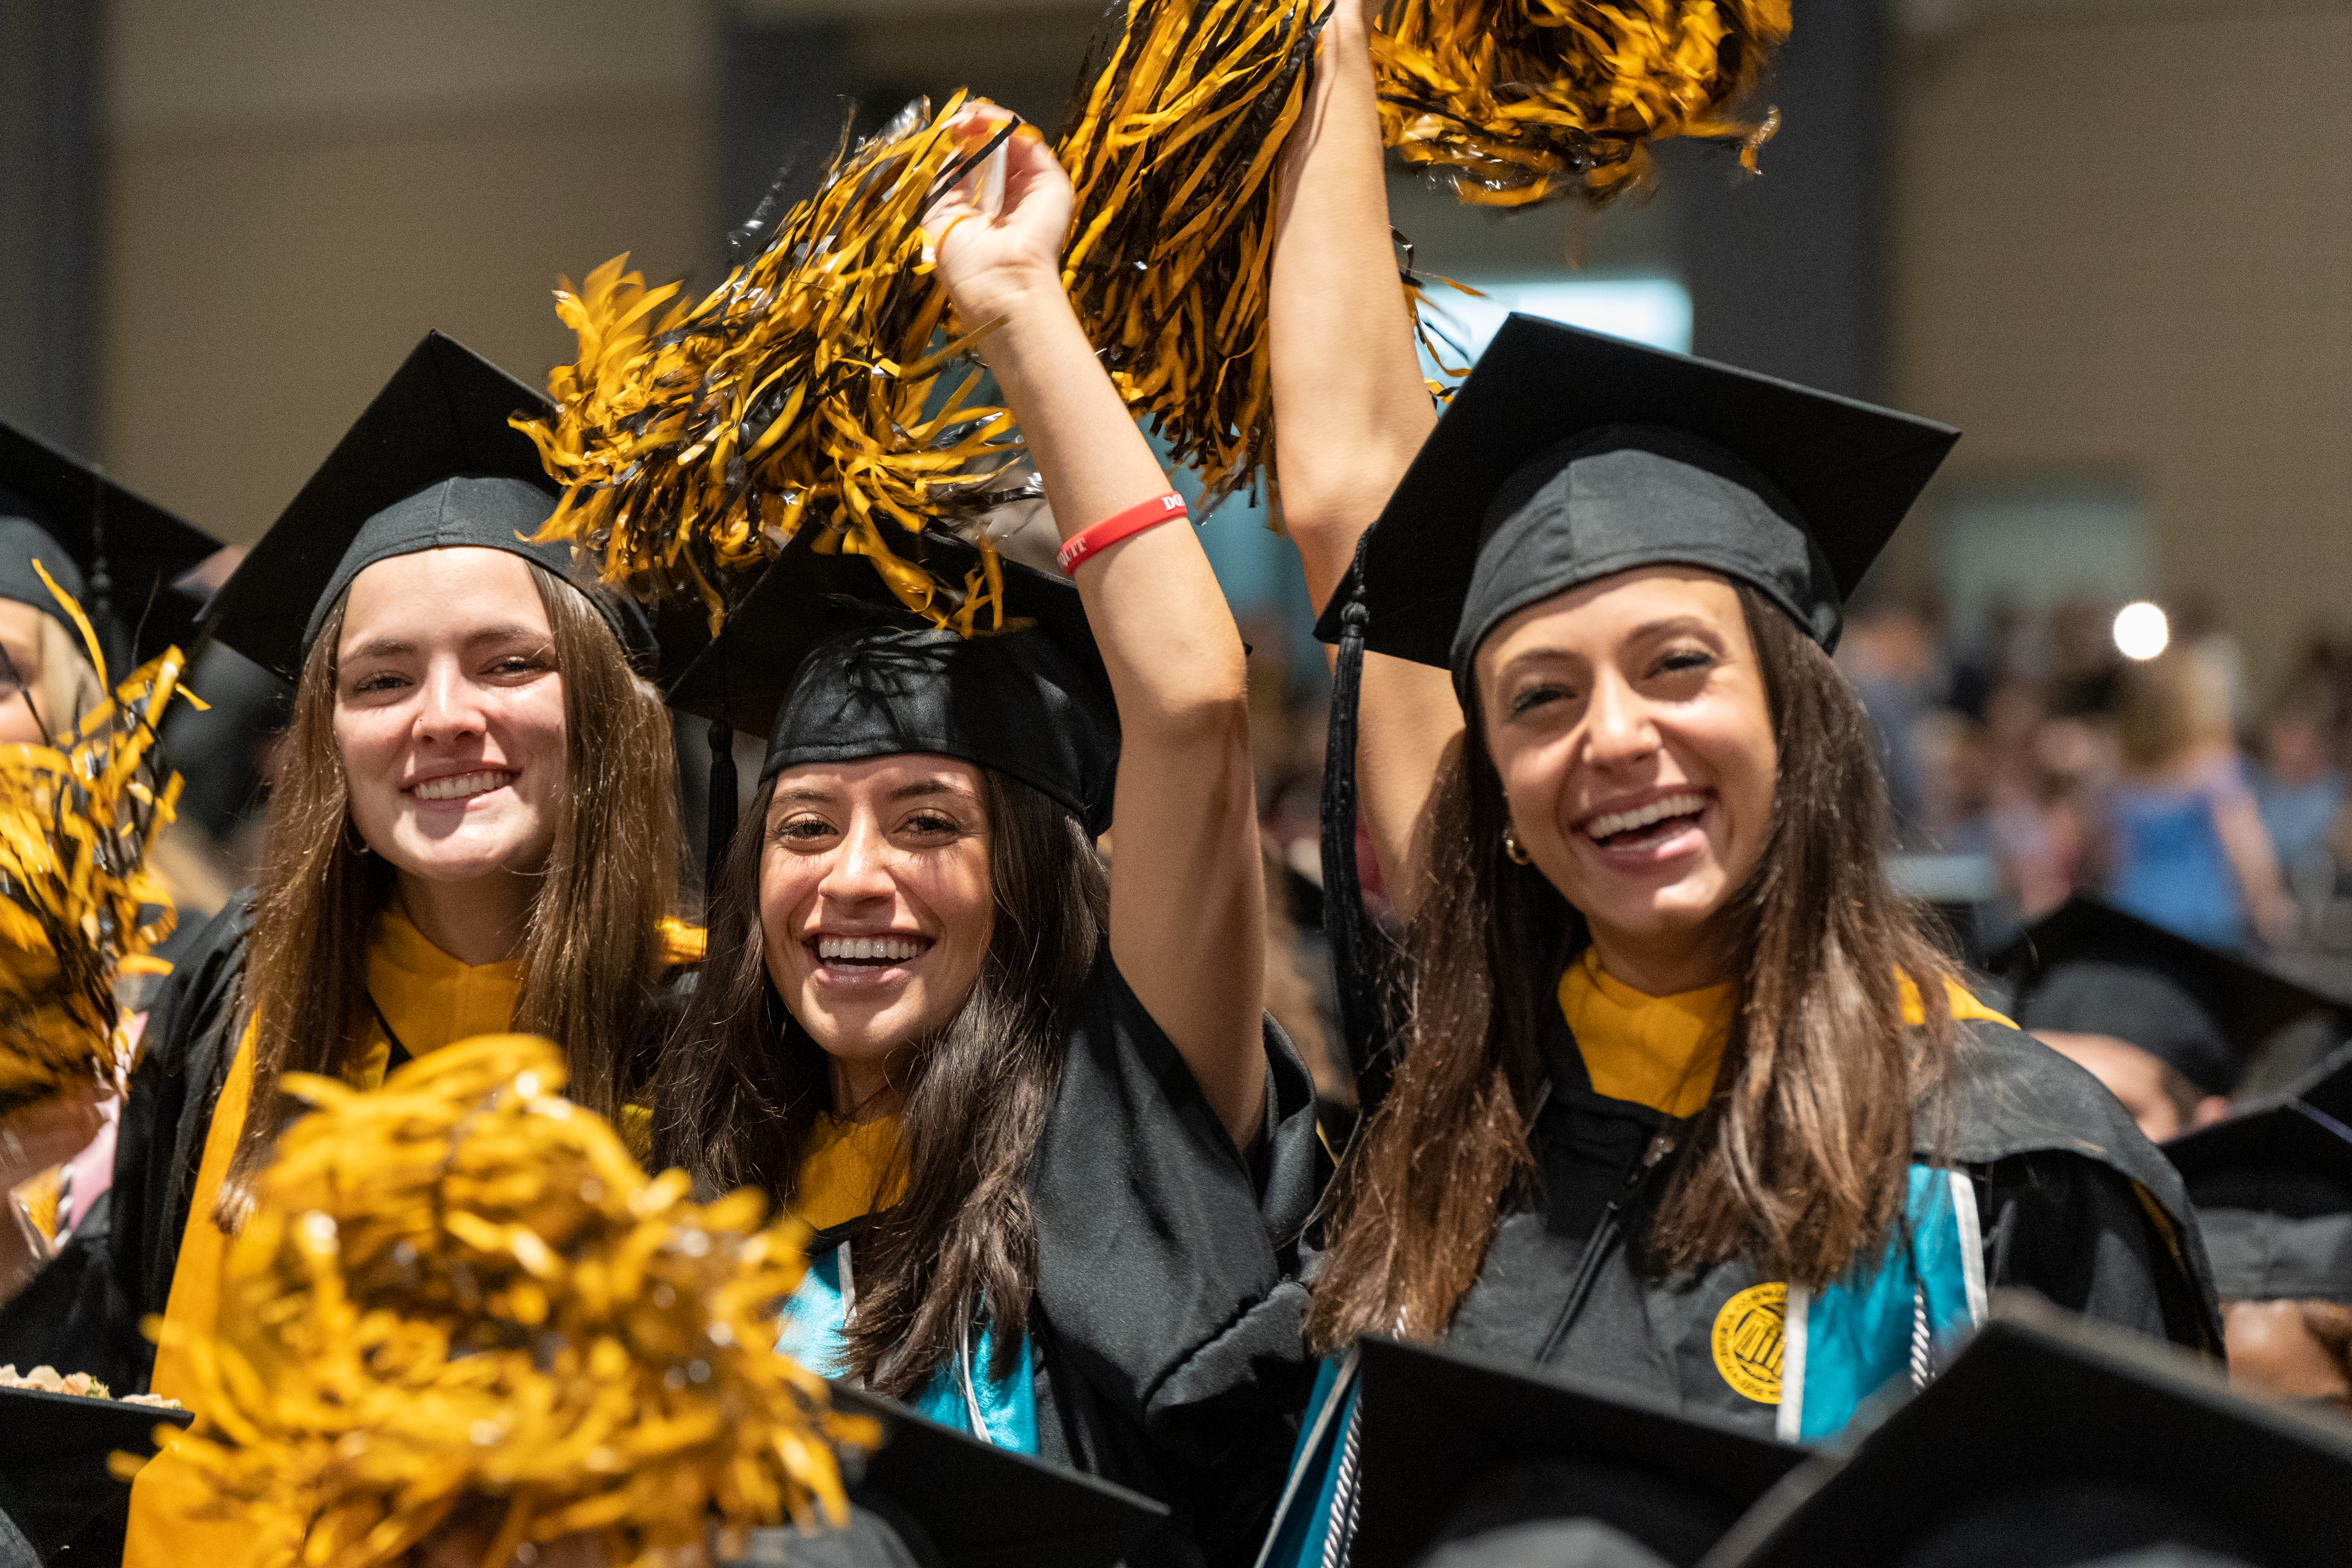 Three female graduates in cap and gown celebrating with pom-poms